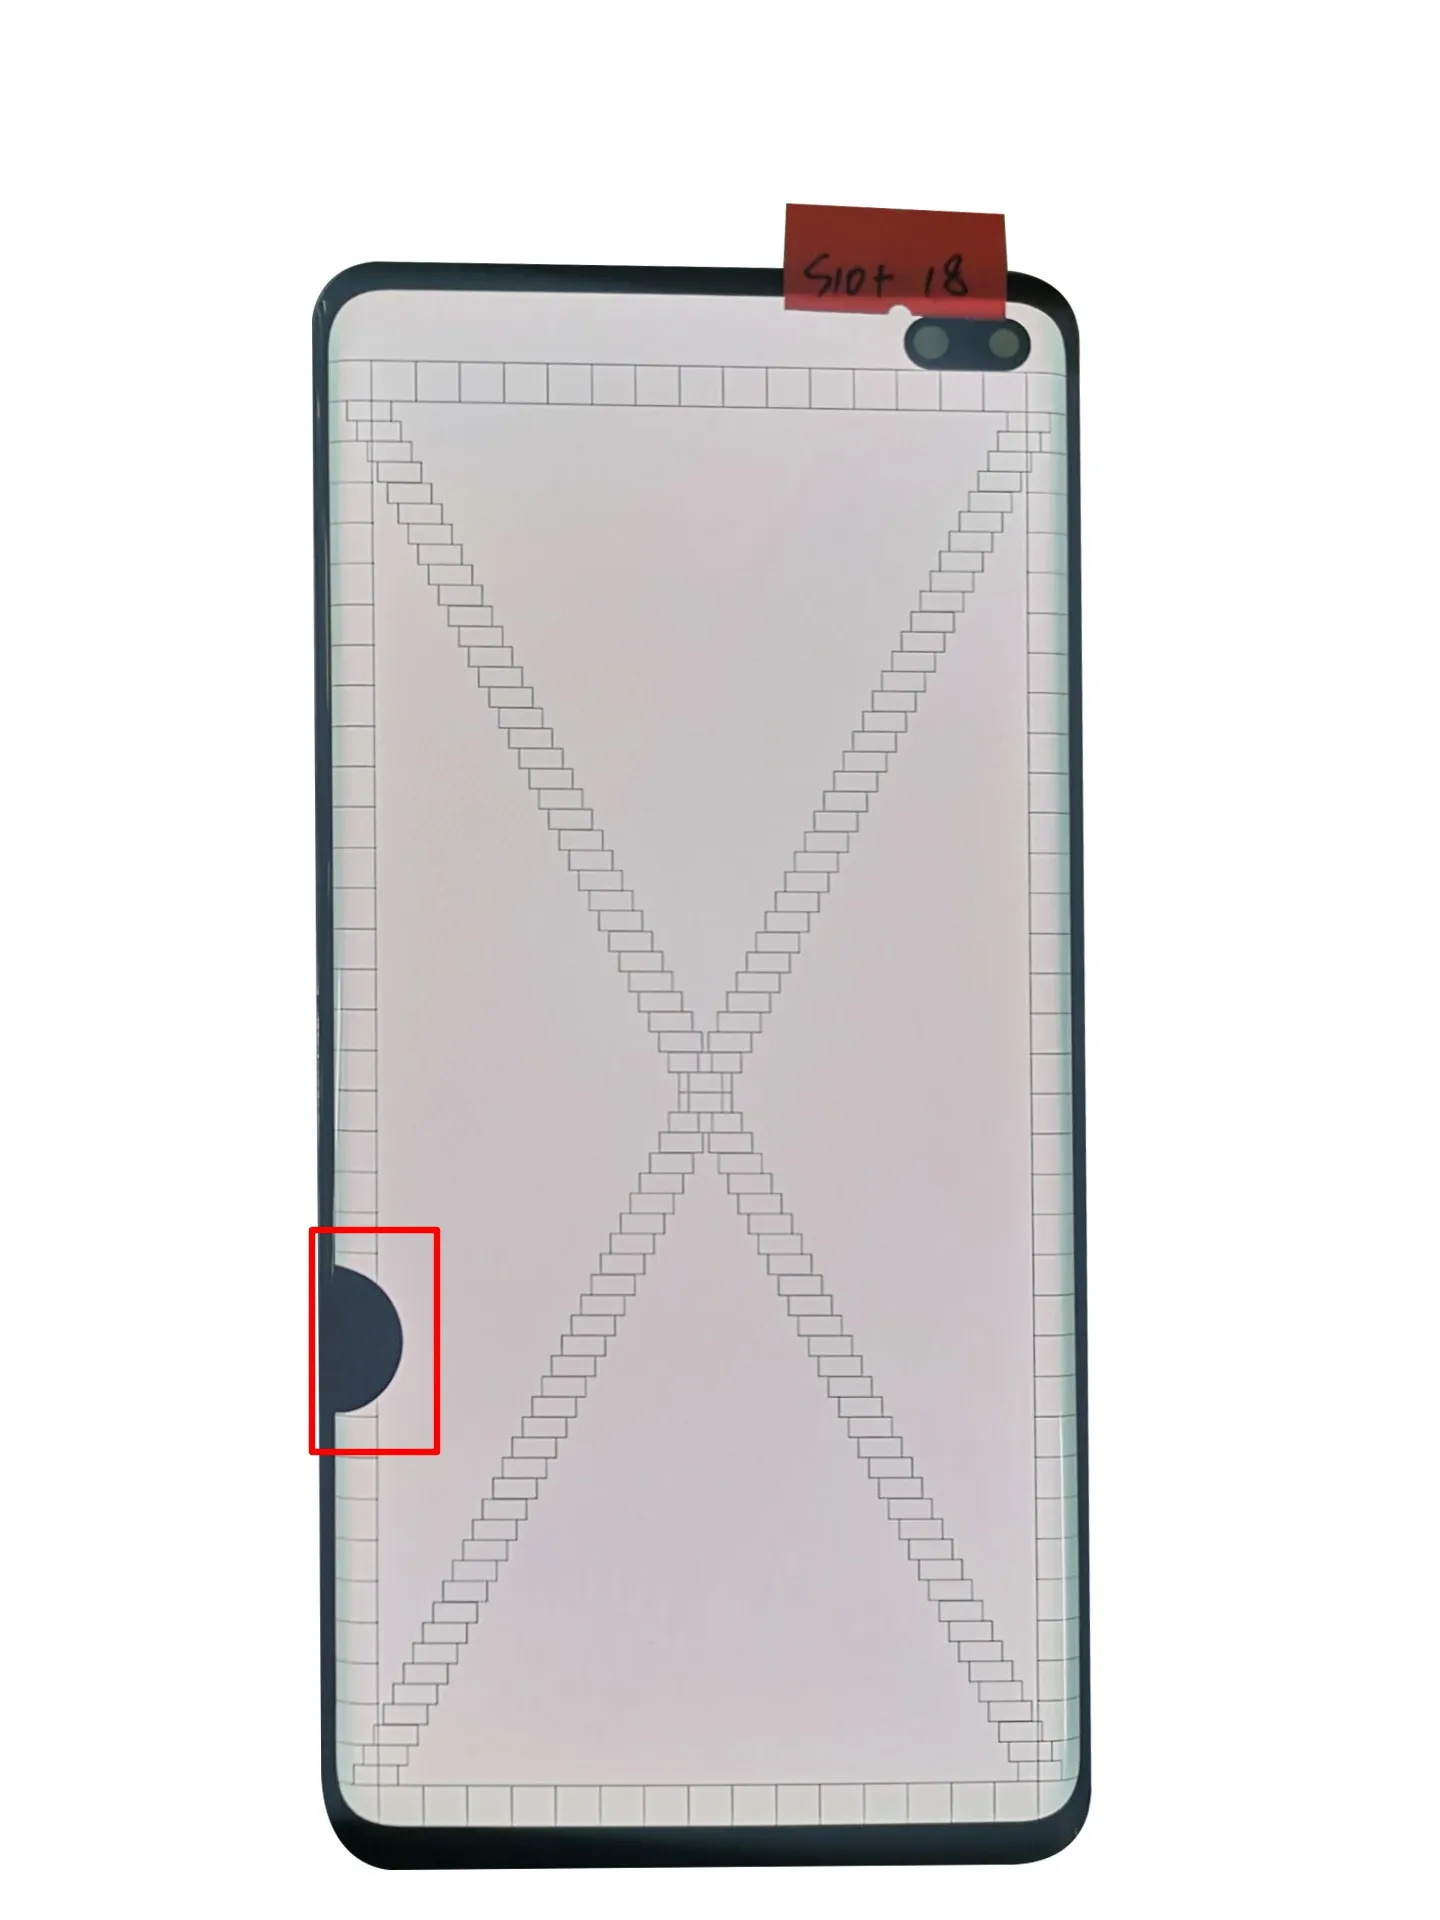 Original S10 Plus lcd For Samsung S10+ G975 S10 Plus G975W G975F LCD Display Touch Screen Digitizer With Dead Pixel Part enlarge